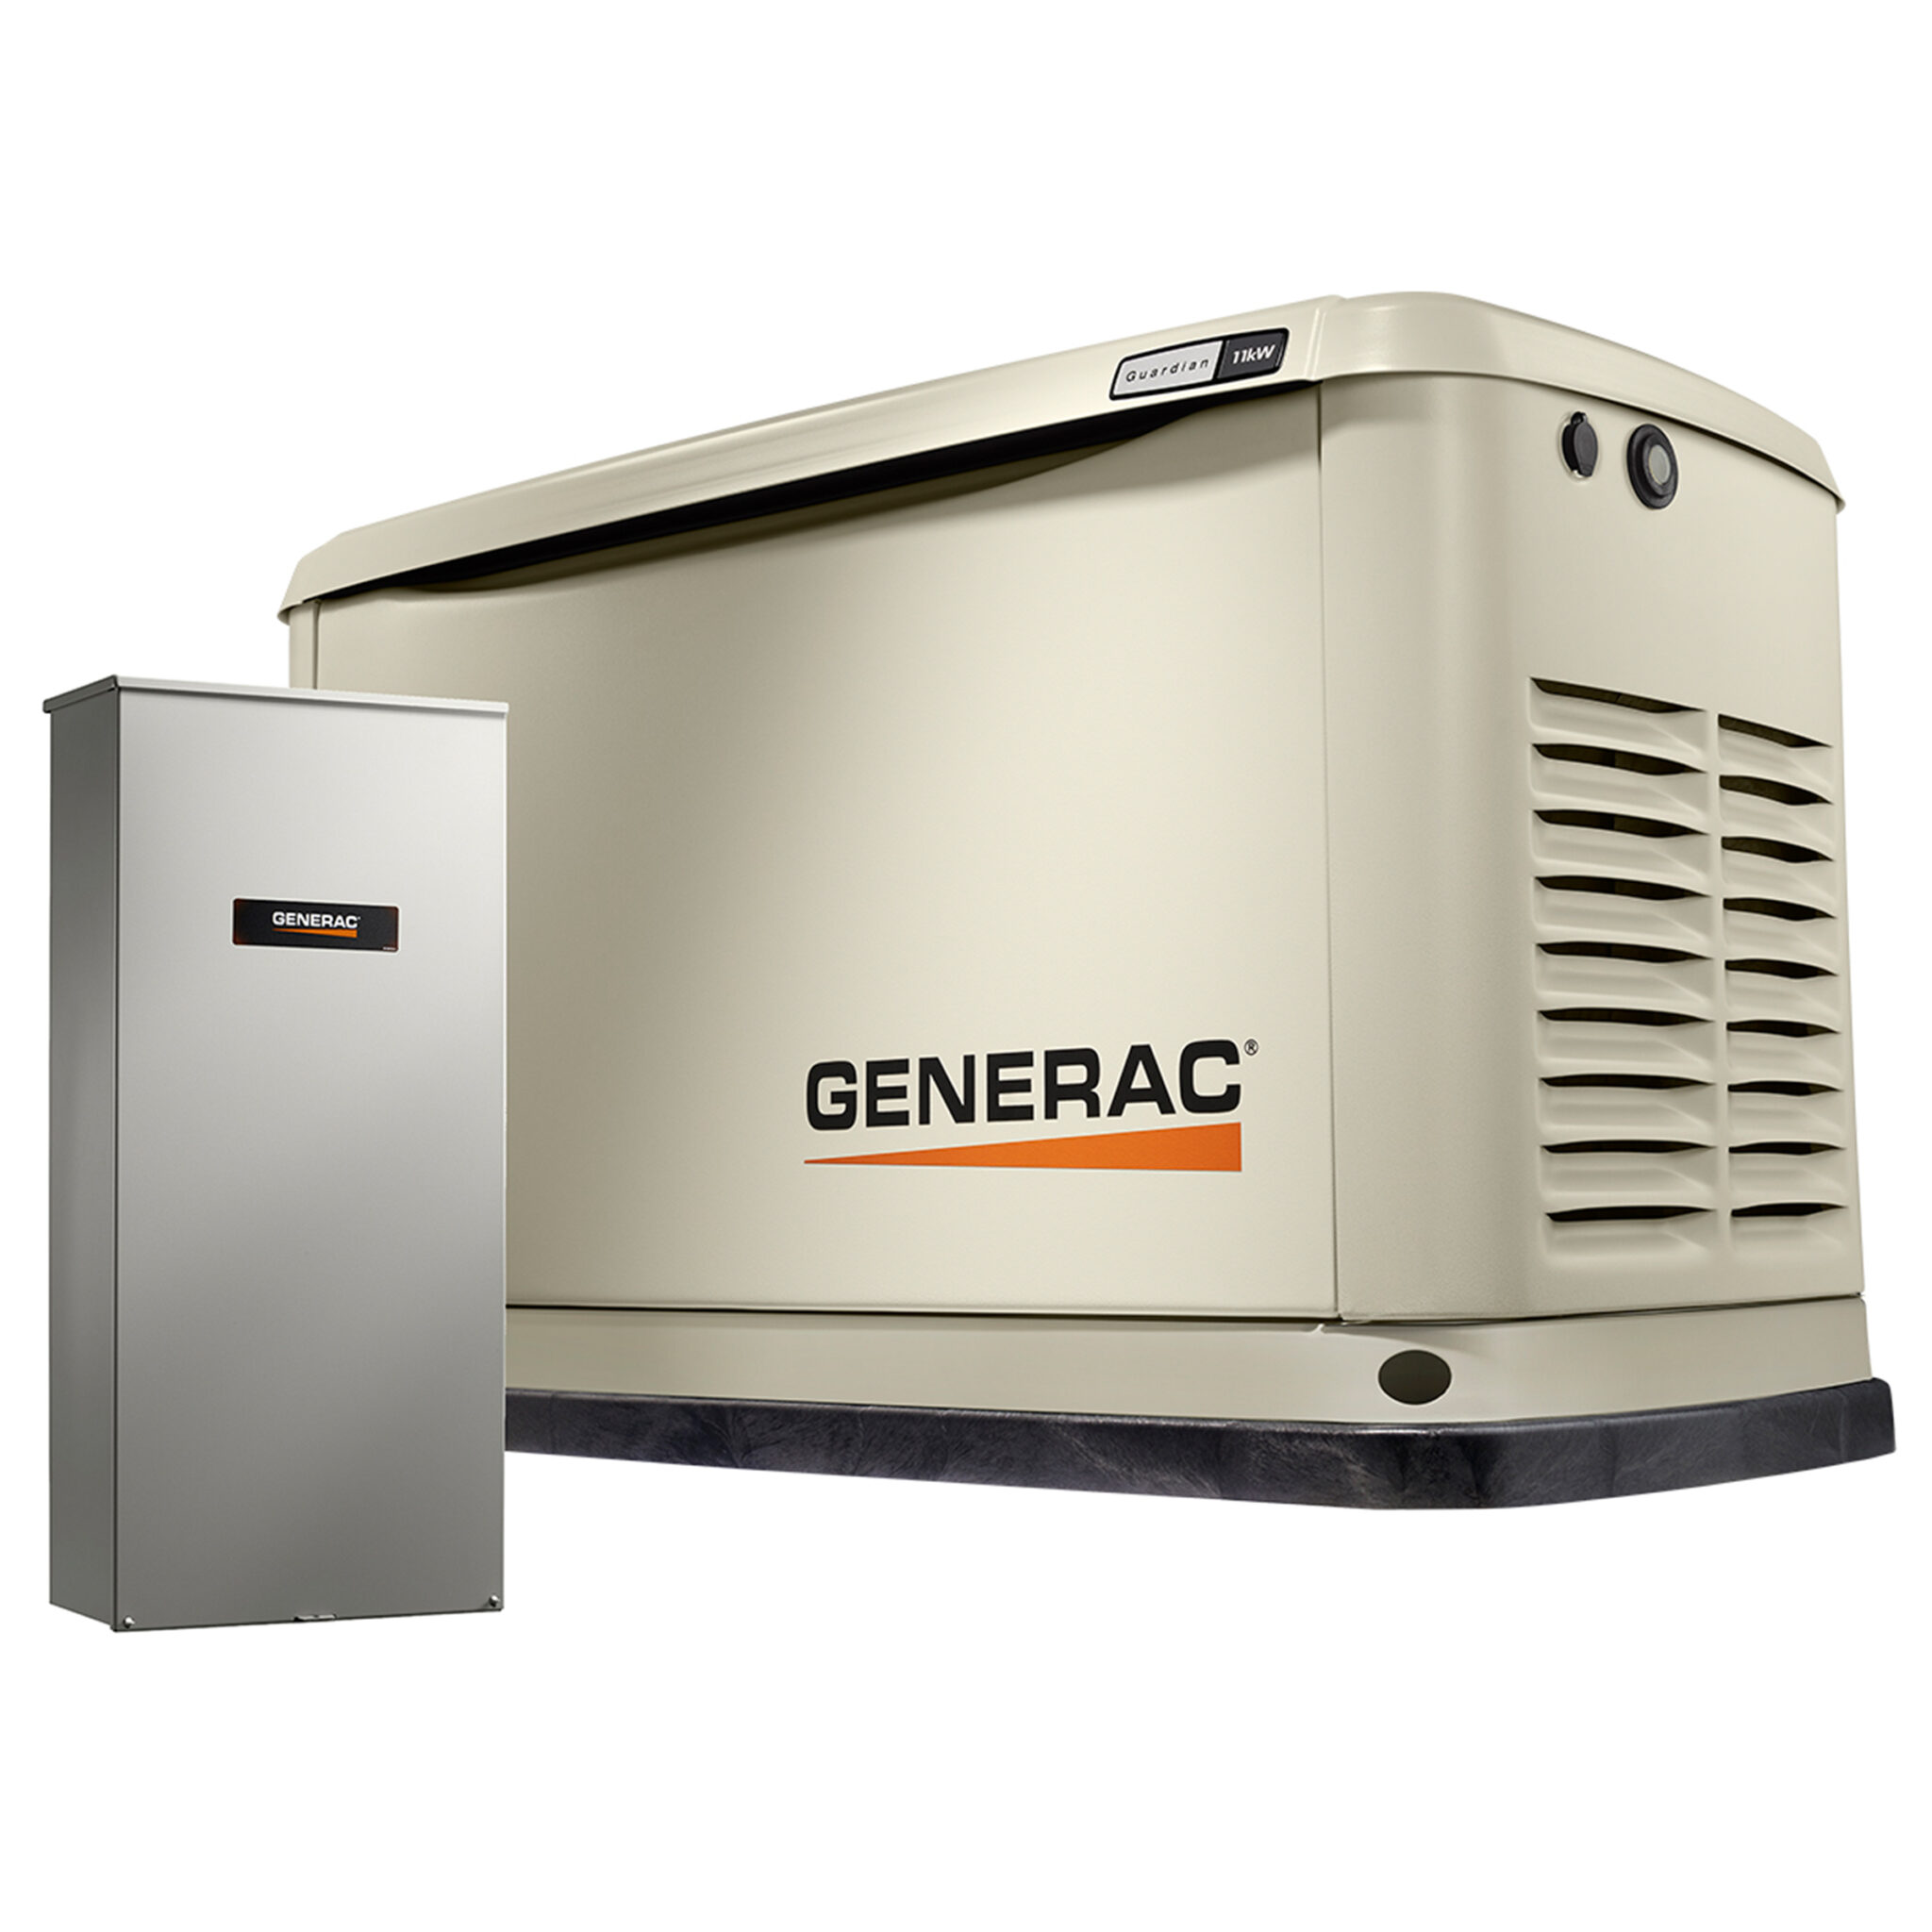 Generac generators in portage for residential and commercial power